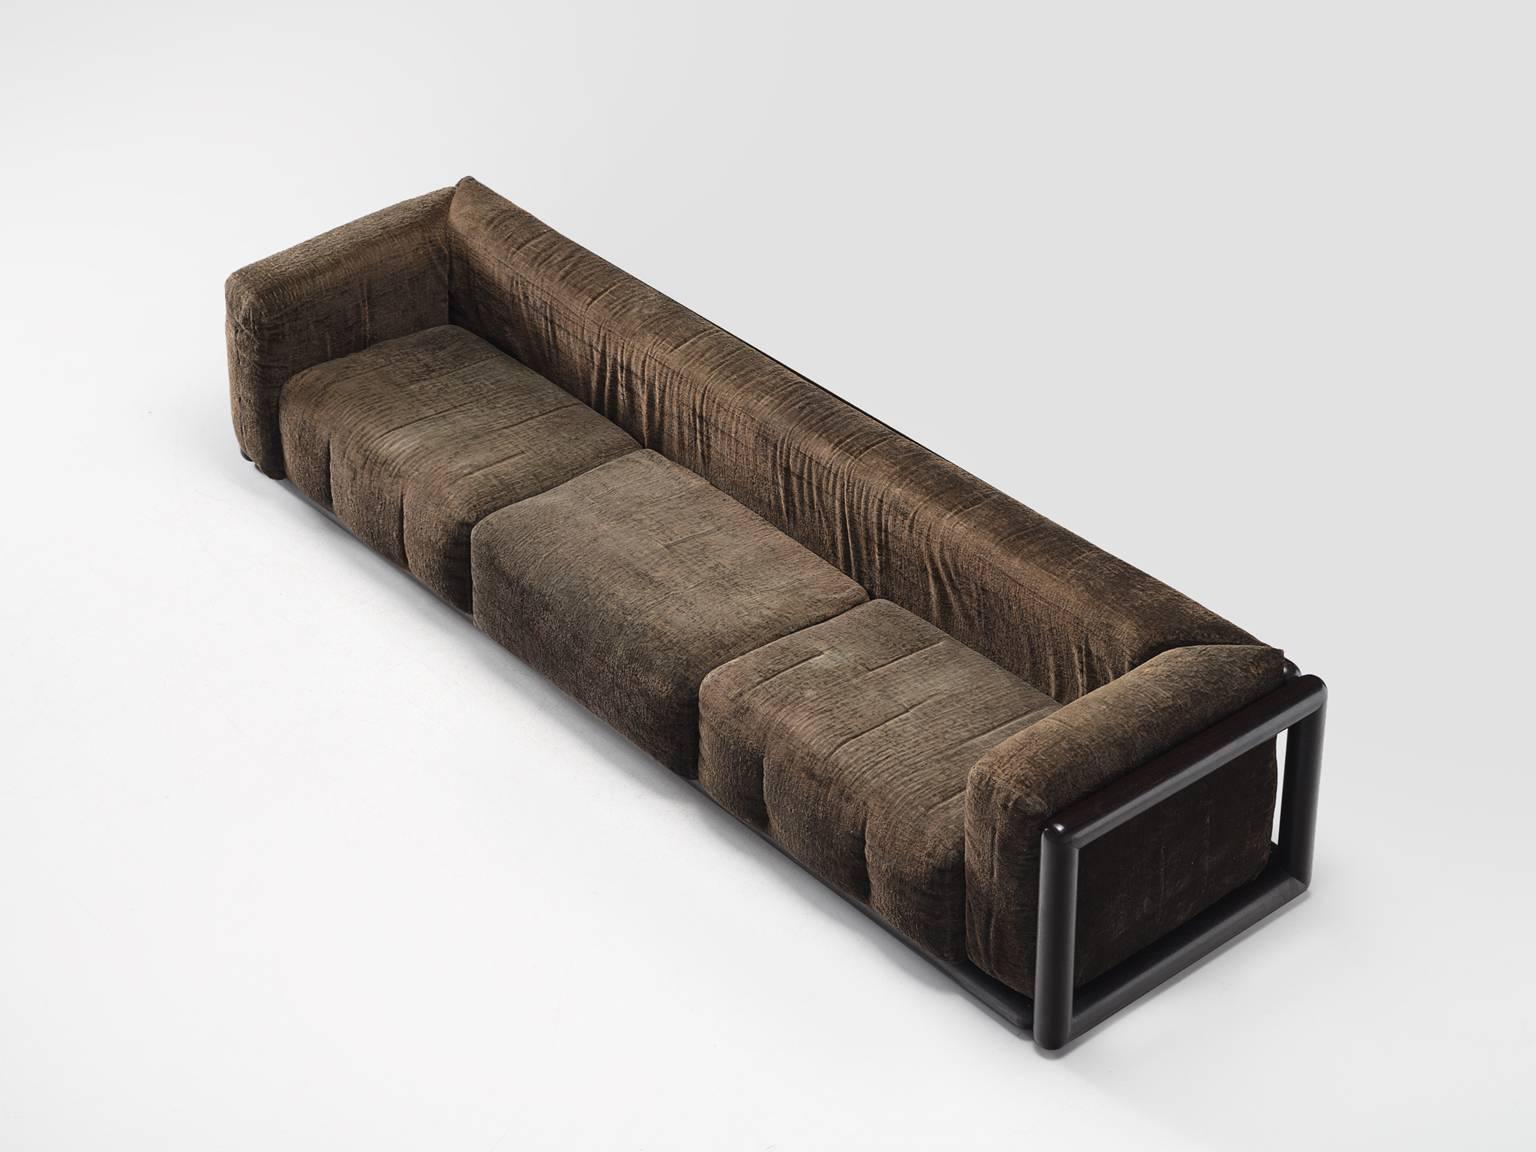 Carlo Scarpa for Simon, 'Cornaro' sofa, brown fabric, wood, Italy, 1973

The sofa has a very thick cushion and is upholstered with the original fabric. The sofa has a relatively thin back and armrests. The frame is made out of a thick round wooden